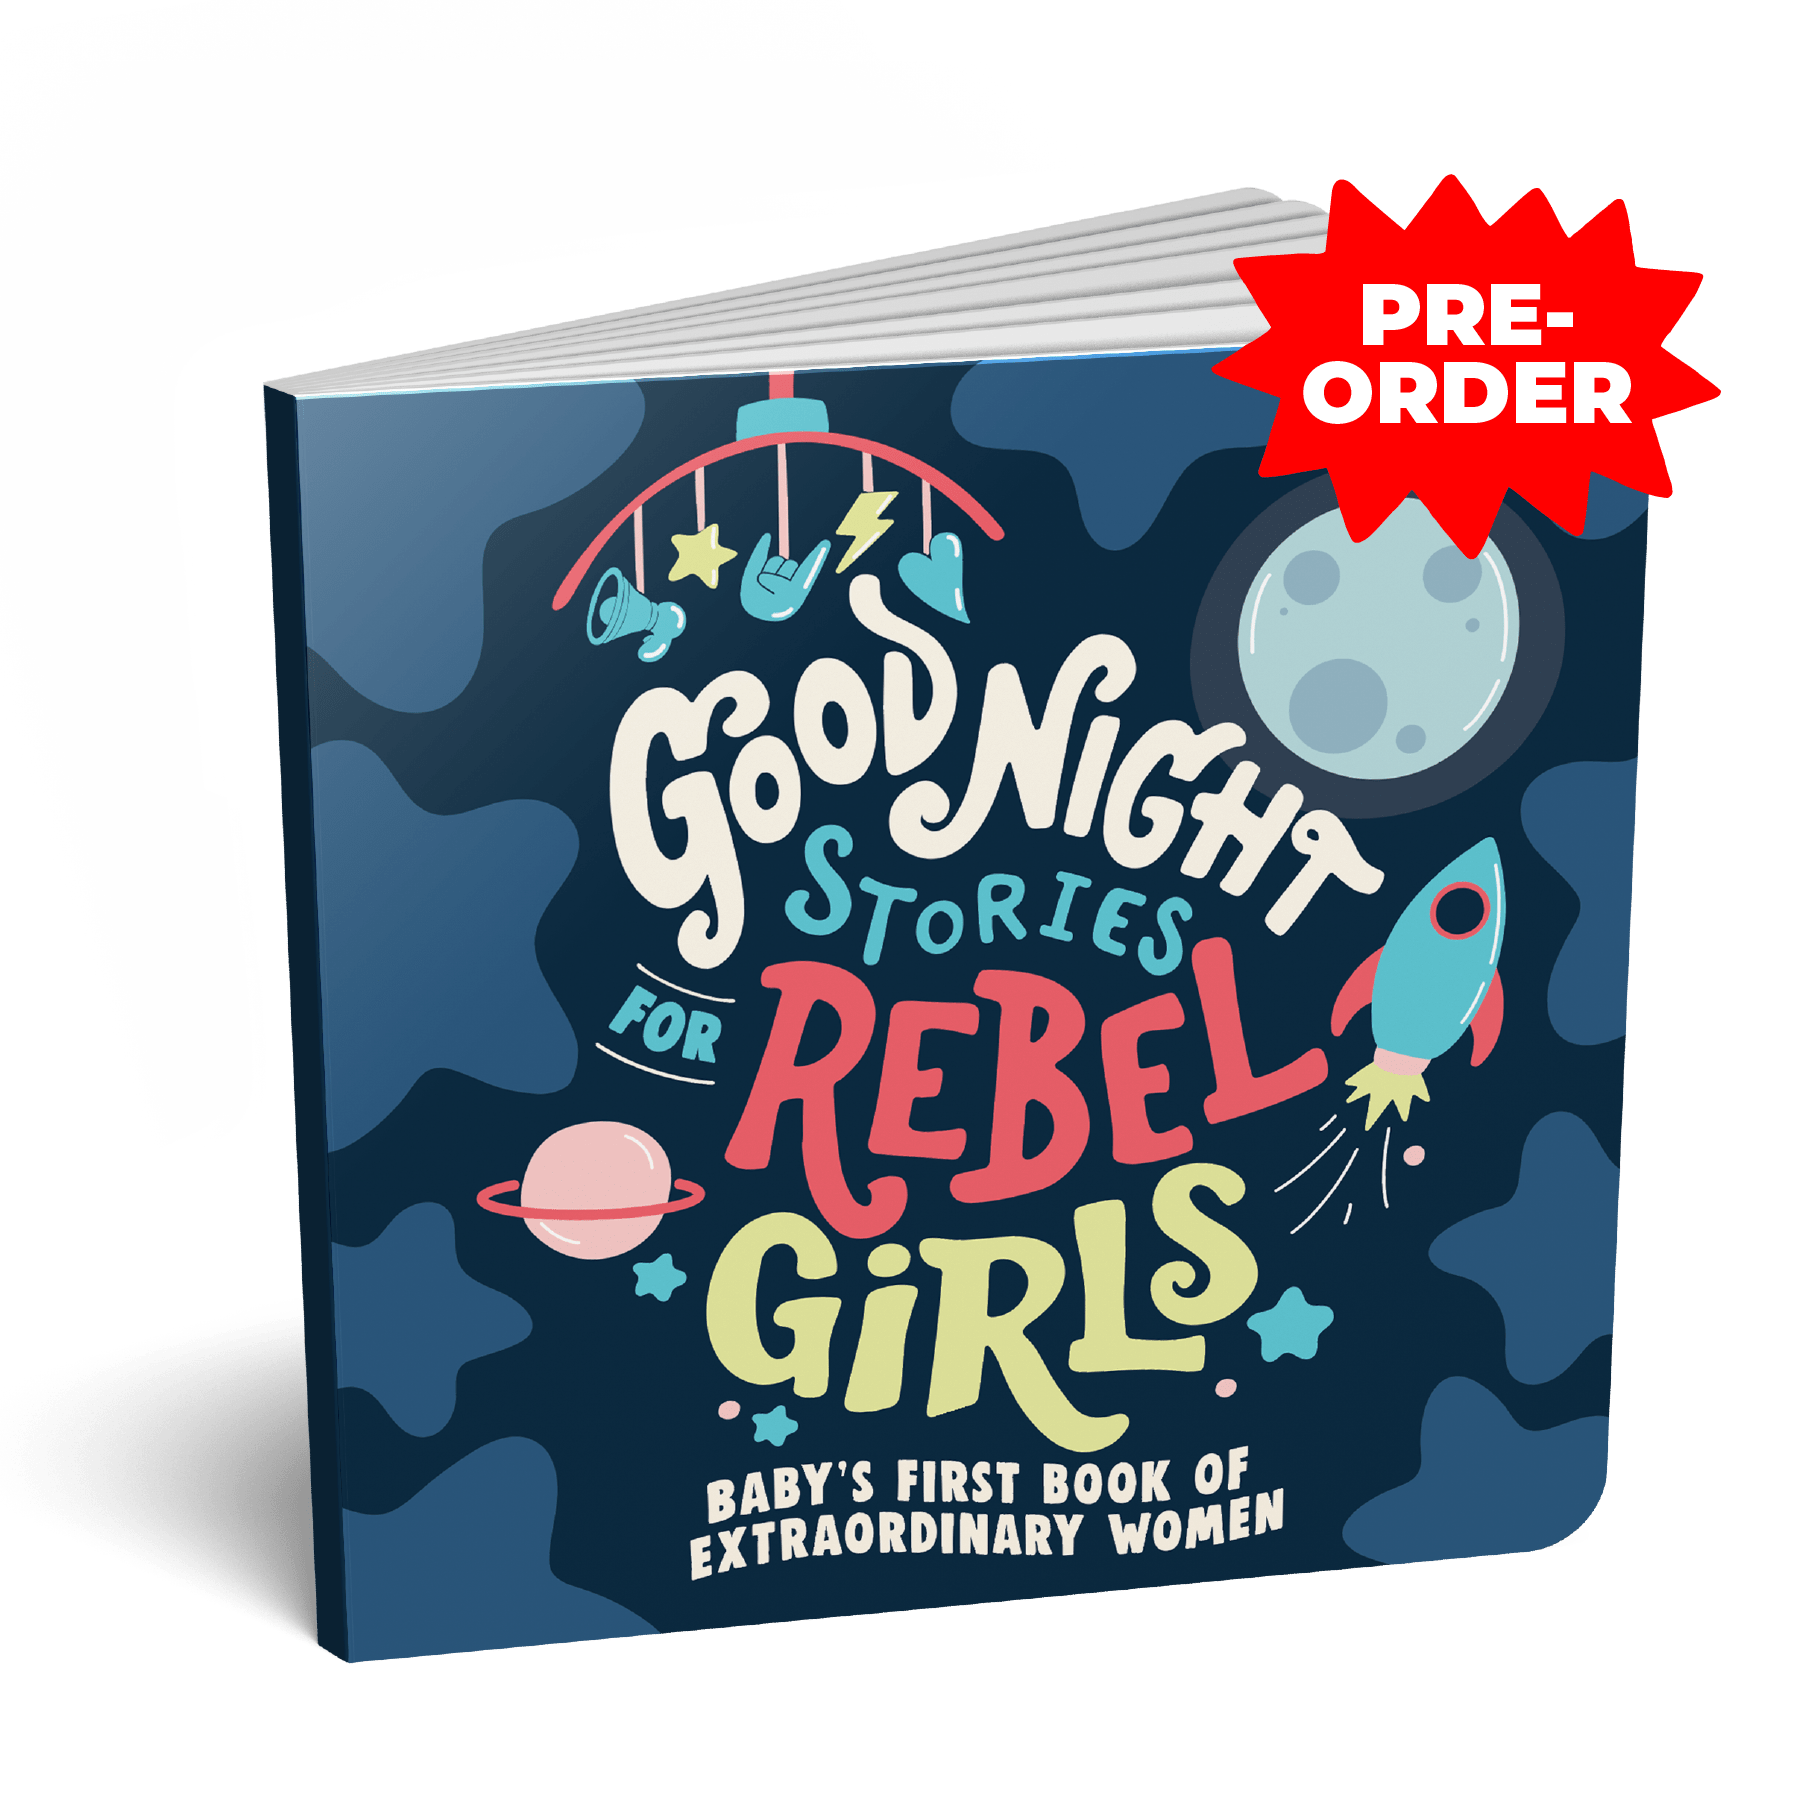 Good Night Stories for Rebel Girls: Baby’s First Book of Extraordinary Women